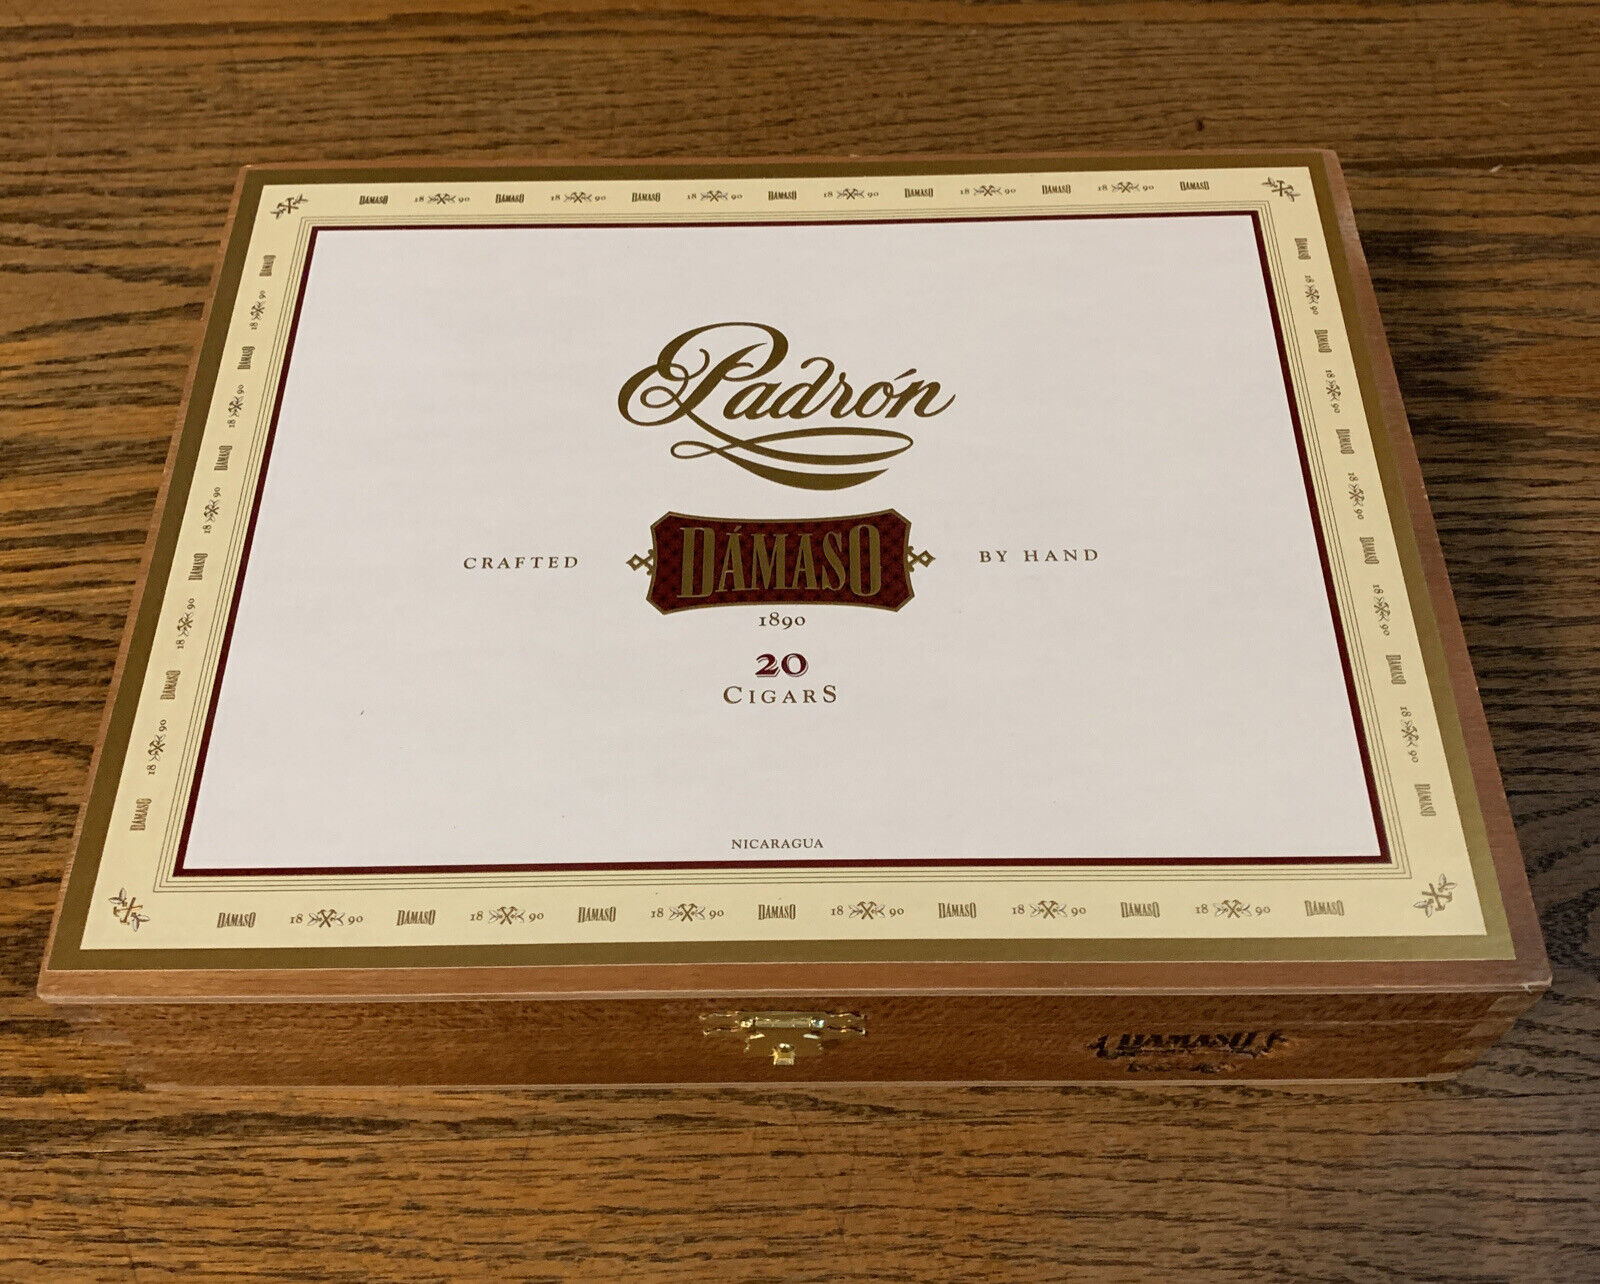 PADRON DAMASO Number 15 WOOD CIGAR BOX - BEAUTIFUL 9”x7”x2” Excellent Condition